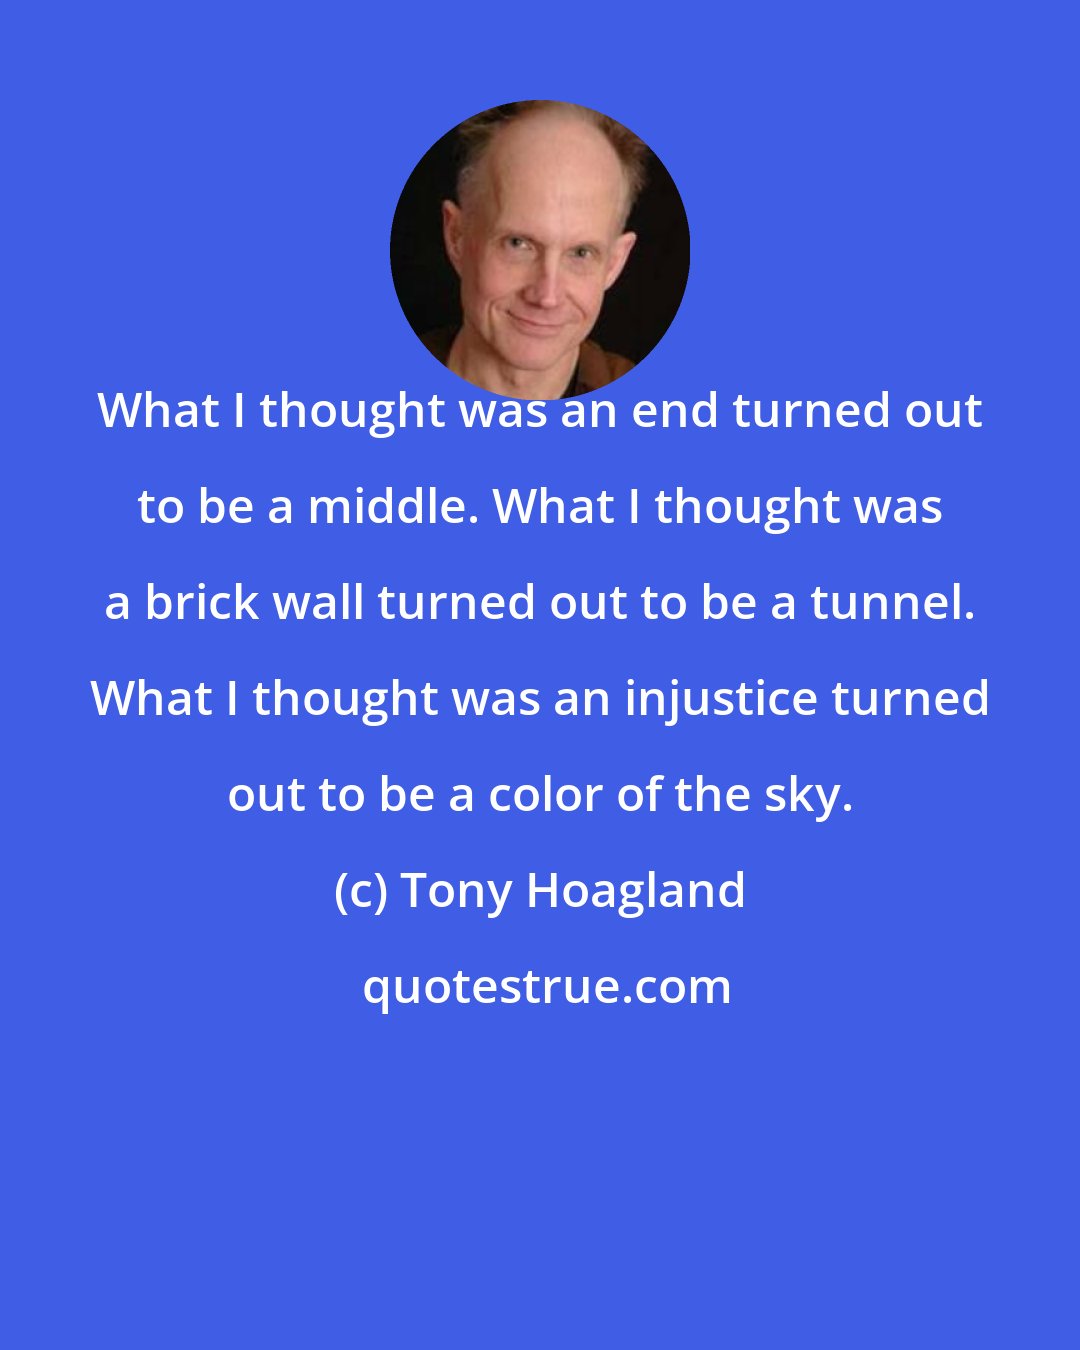 Tony Hoagland: What I thought was an end turned out to be a middle. What I thought was a brick wall turned out to be a tunnel. What I thought was an injustice turned out to be a color of the sky.